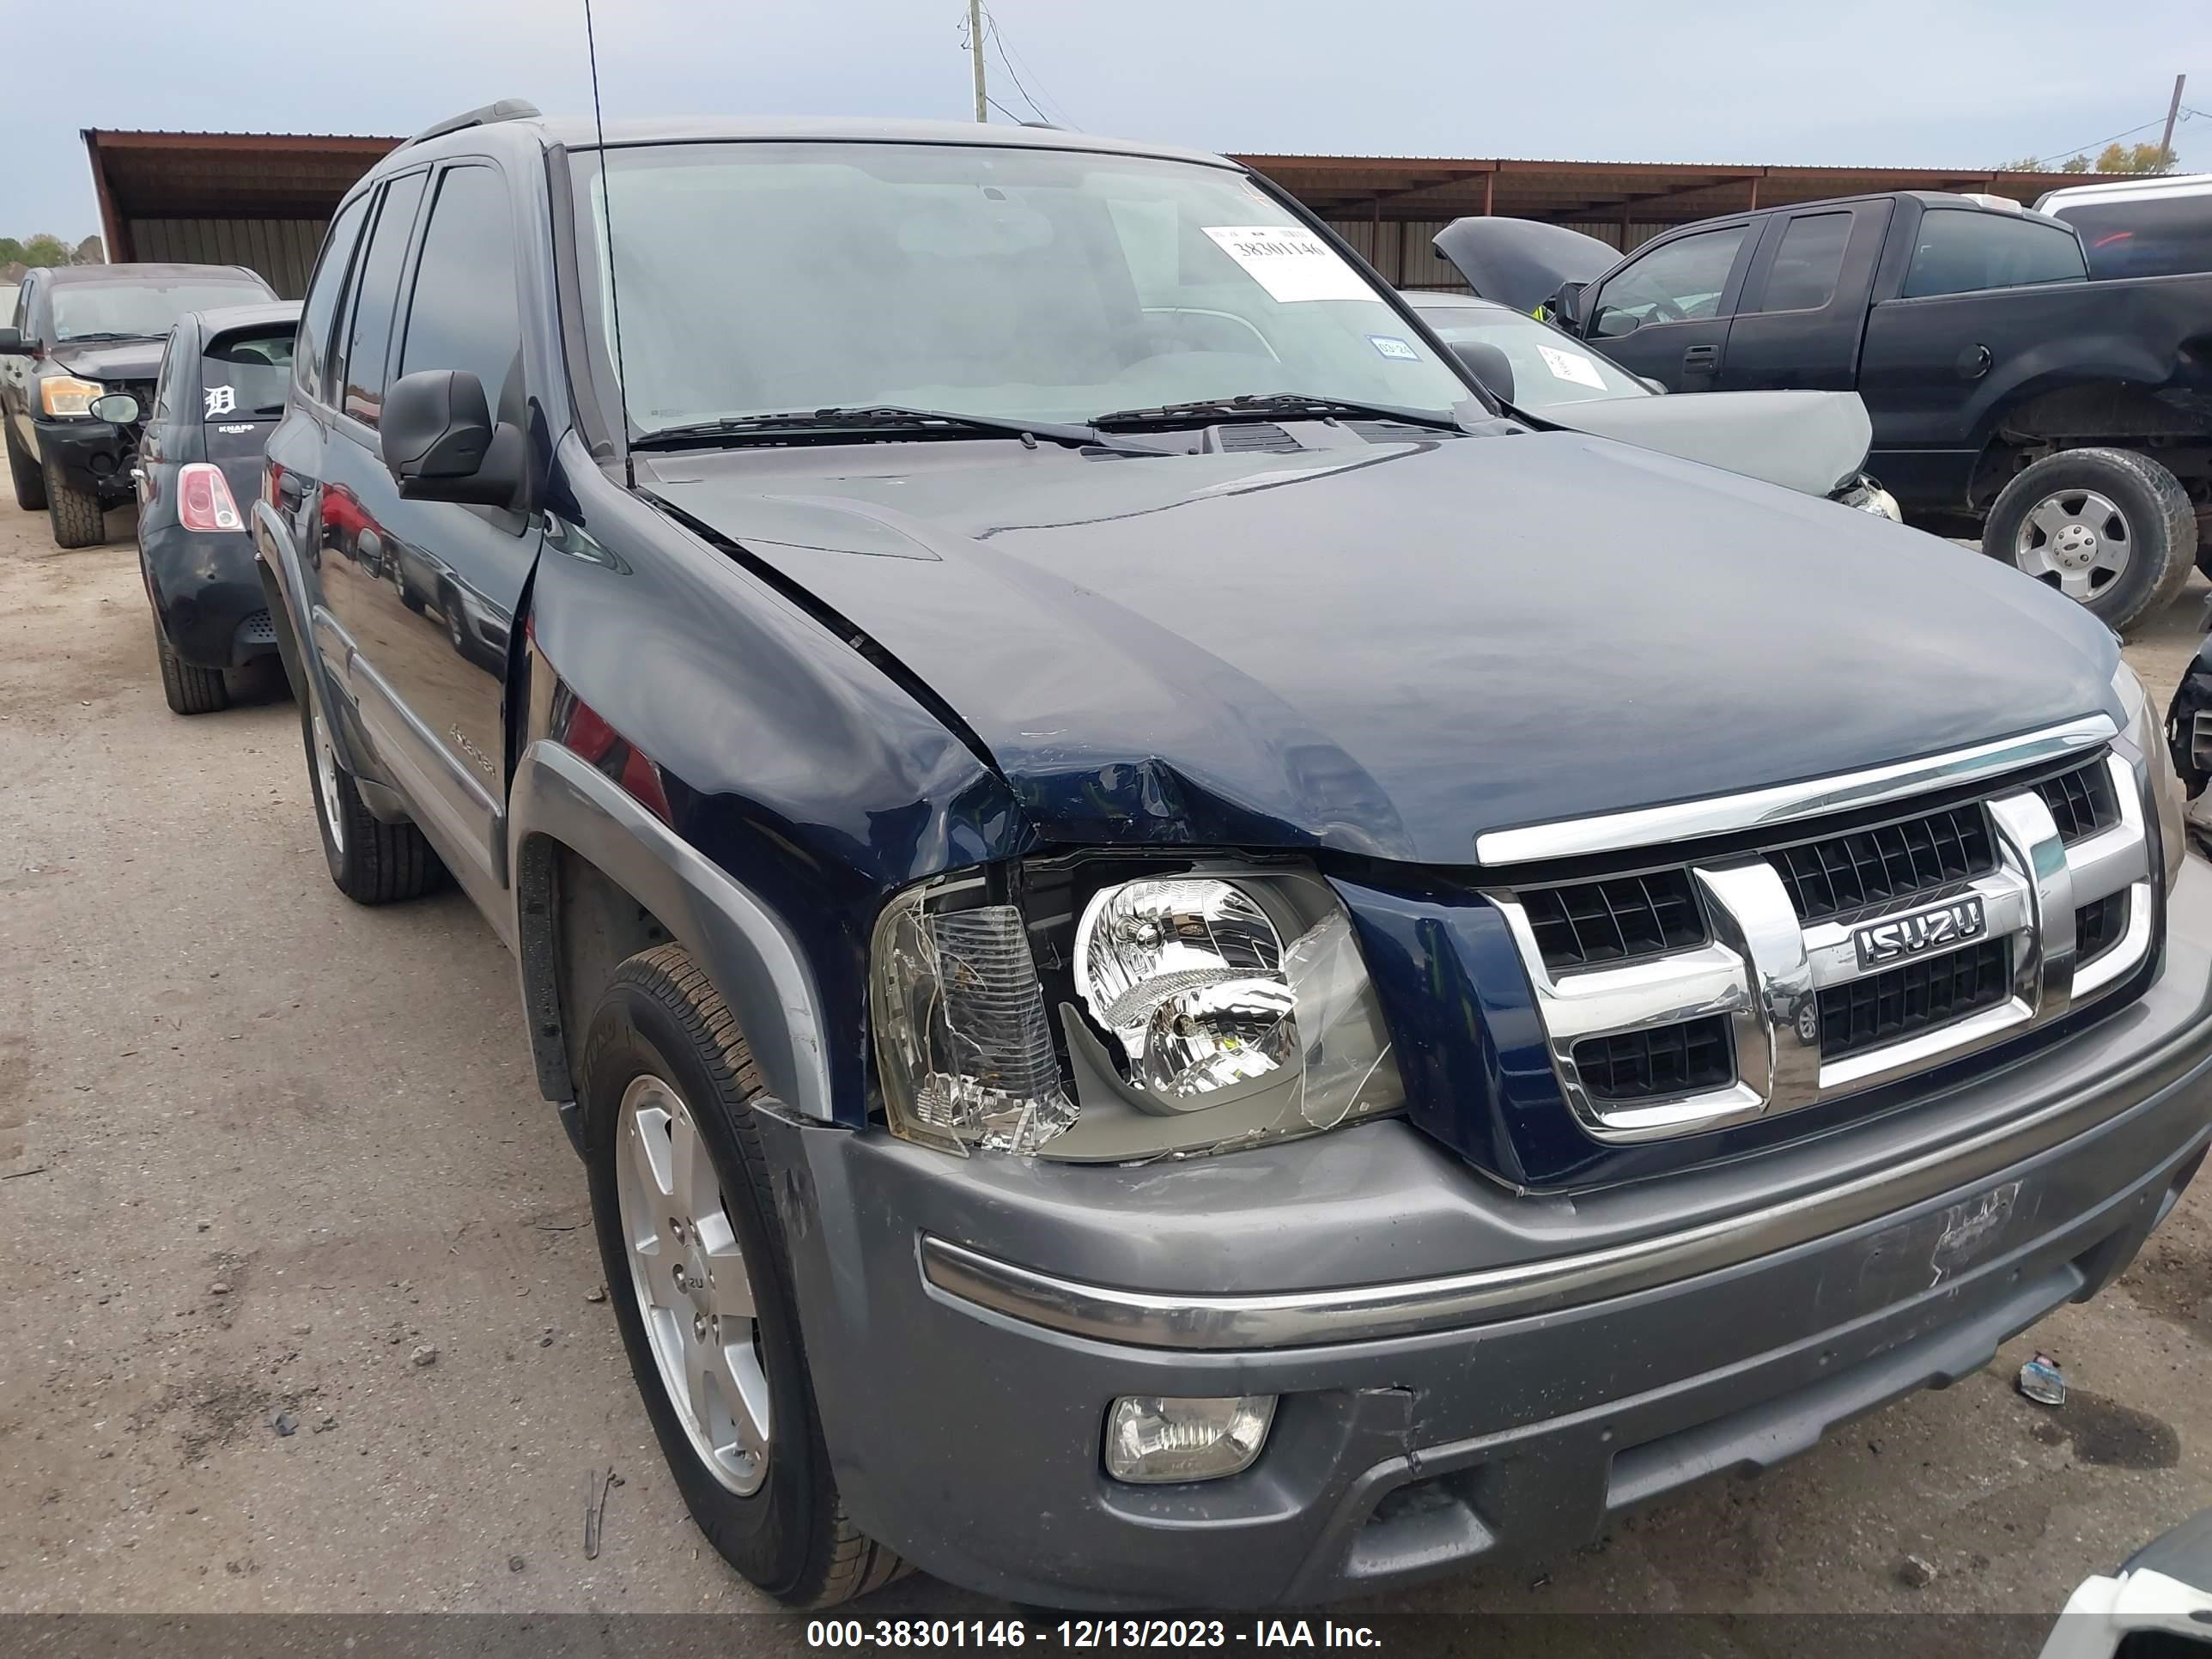 vin: 4NUDS13S582700955 4NUDS13S582700955 2008 isuzu ascender 4200 for Sale in 77038, 2535 West Mt. Houston Road, Houston, Texas, USA